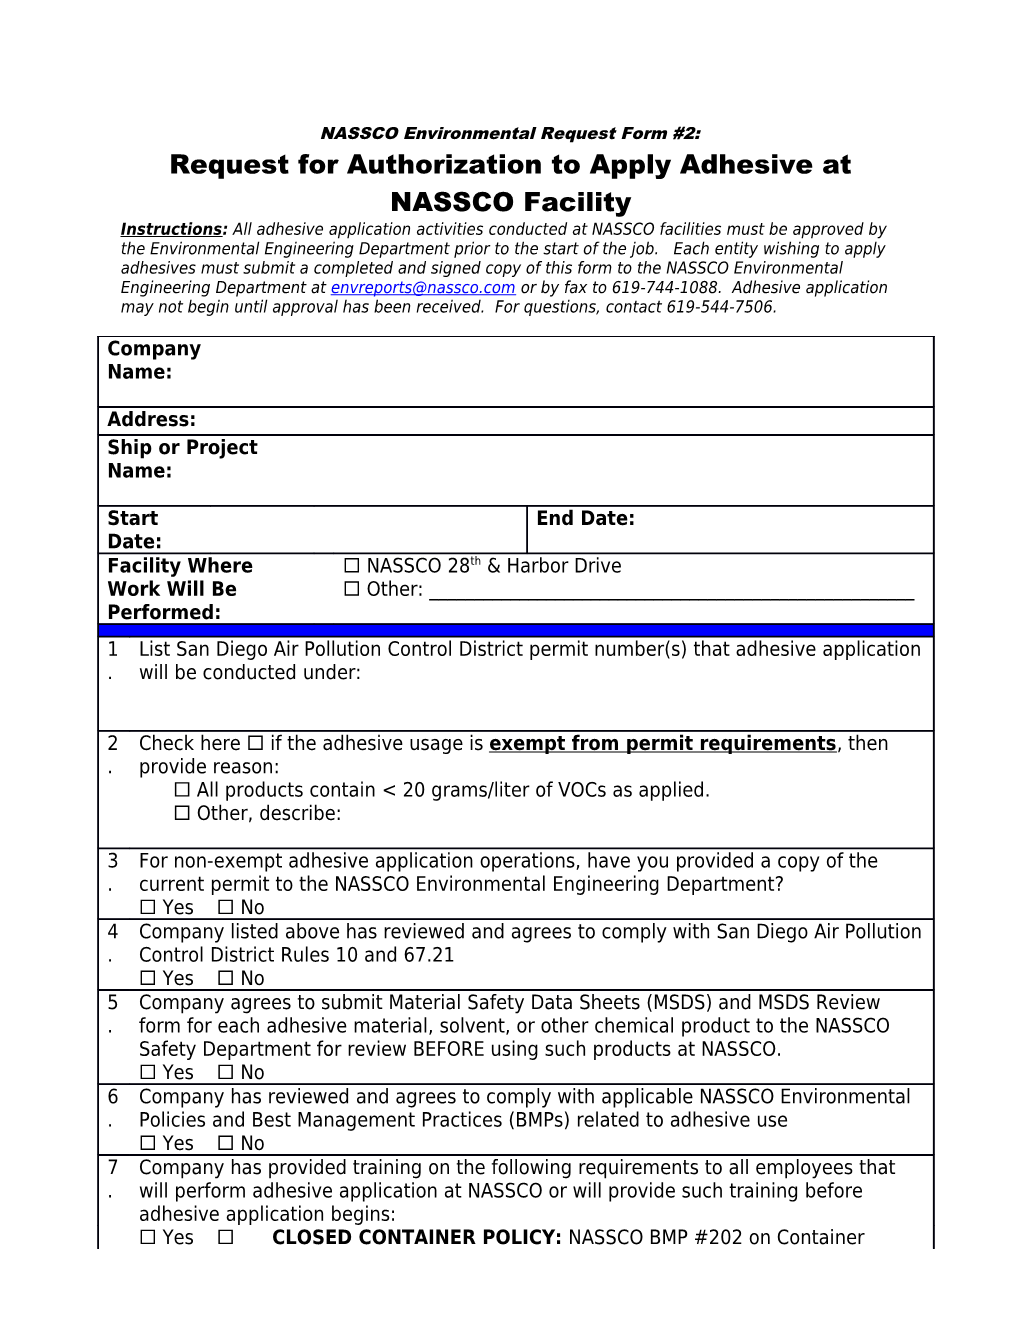 Application for Authorization to Apply Adhesives